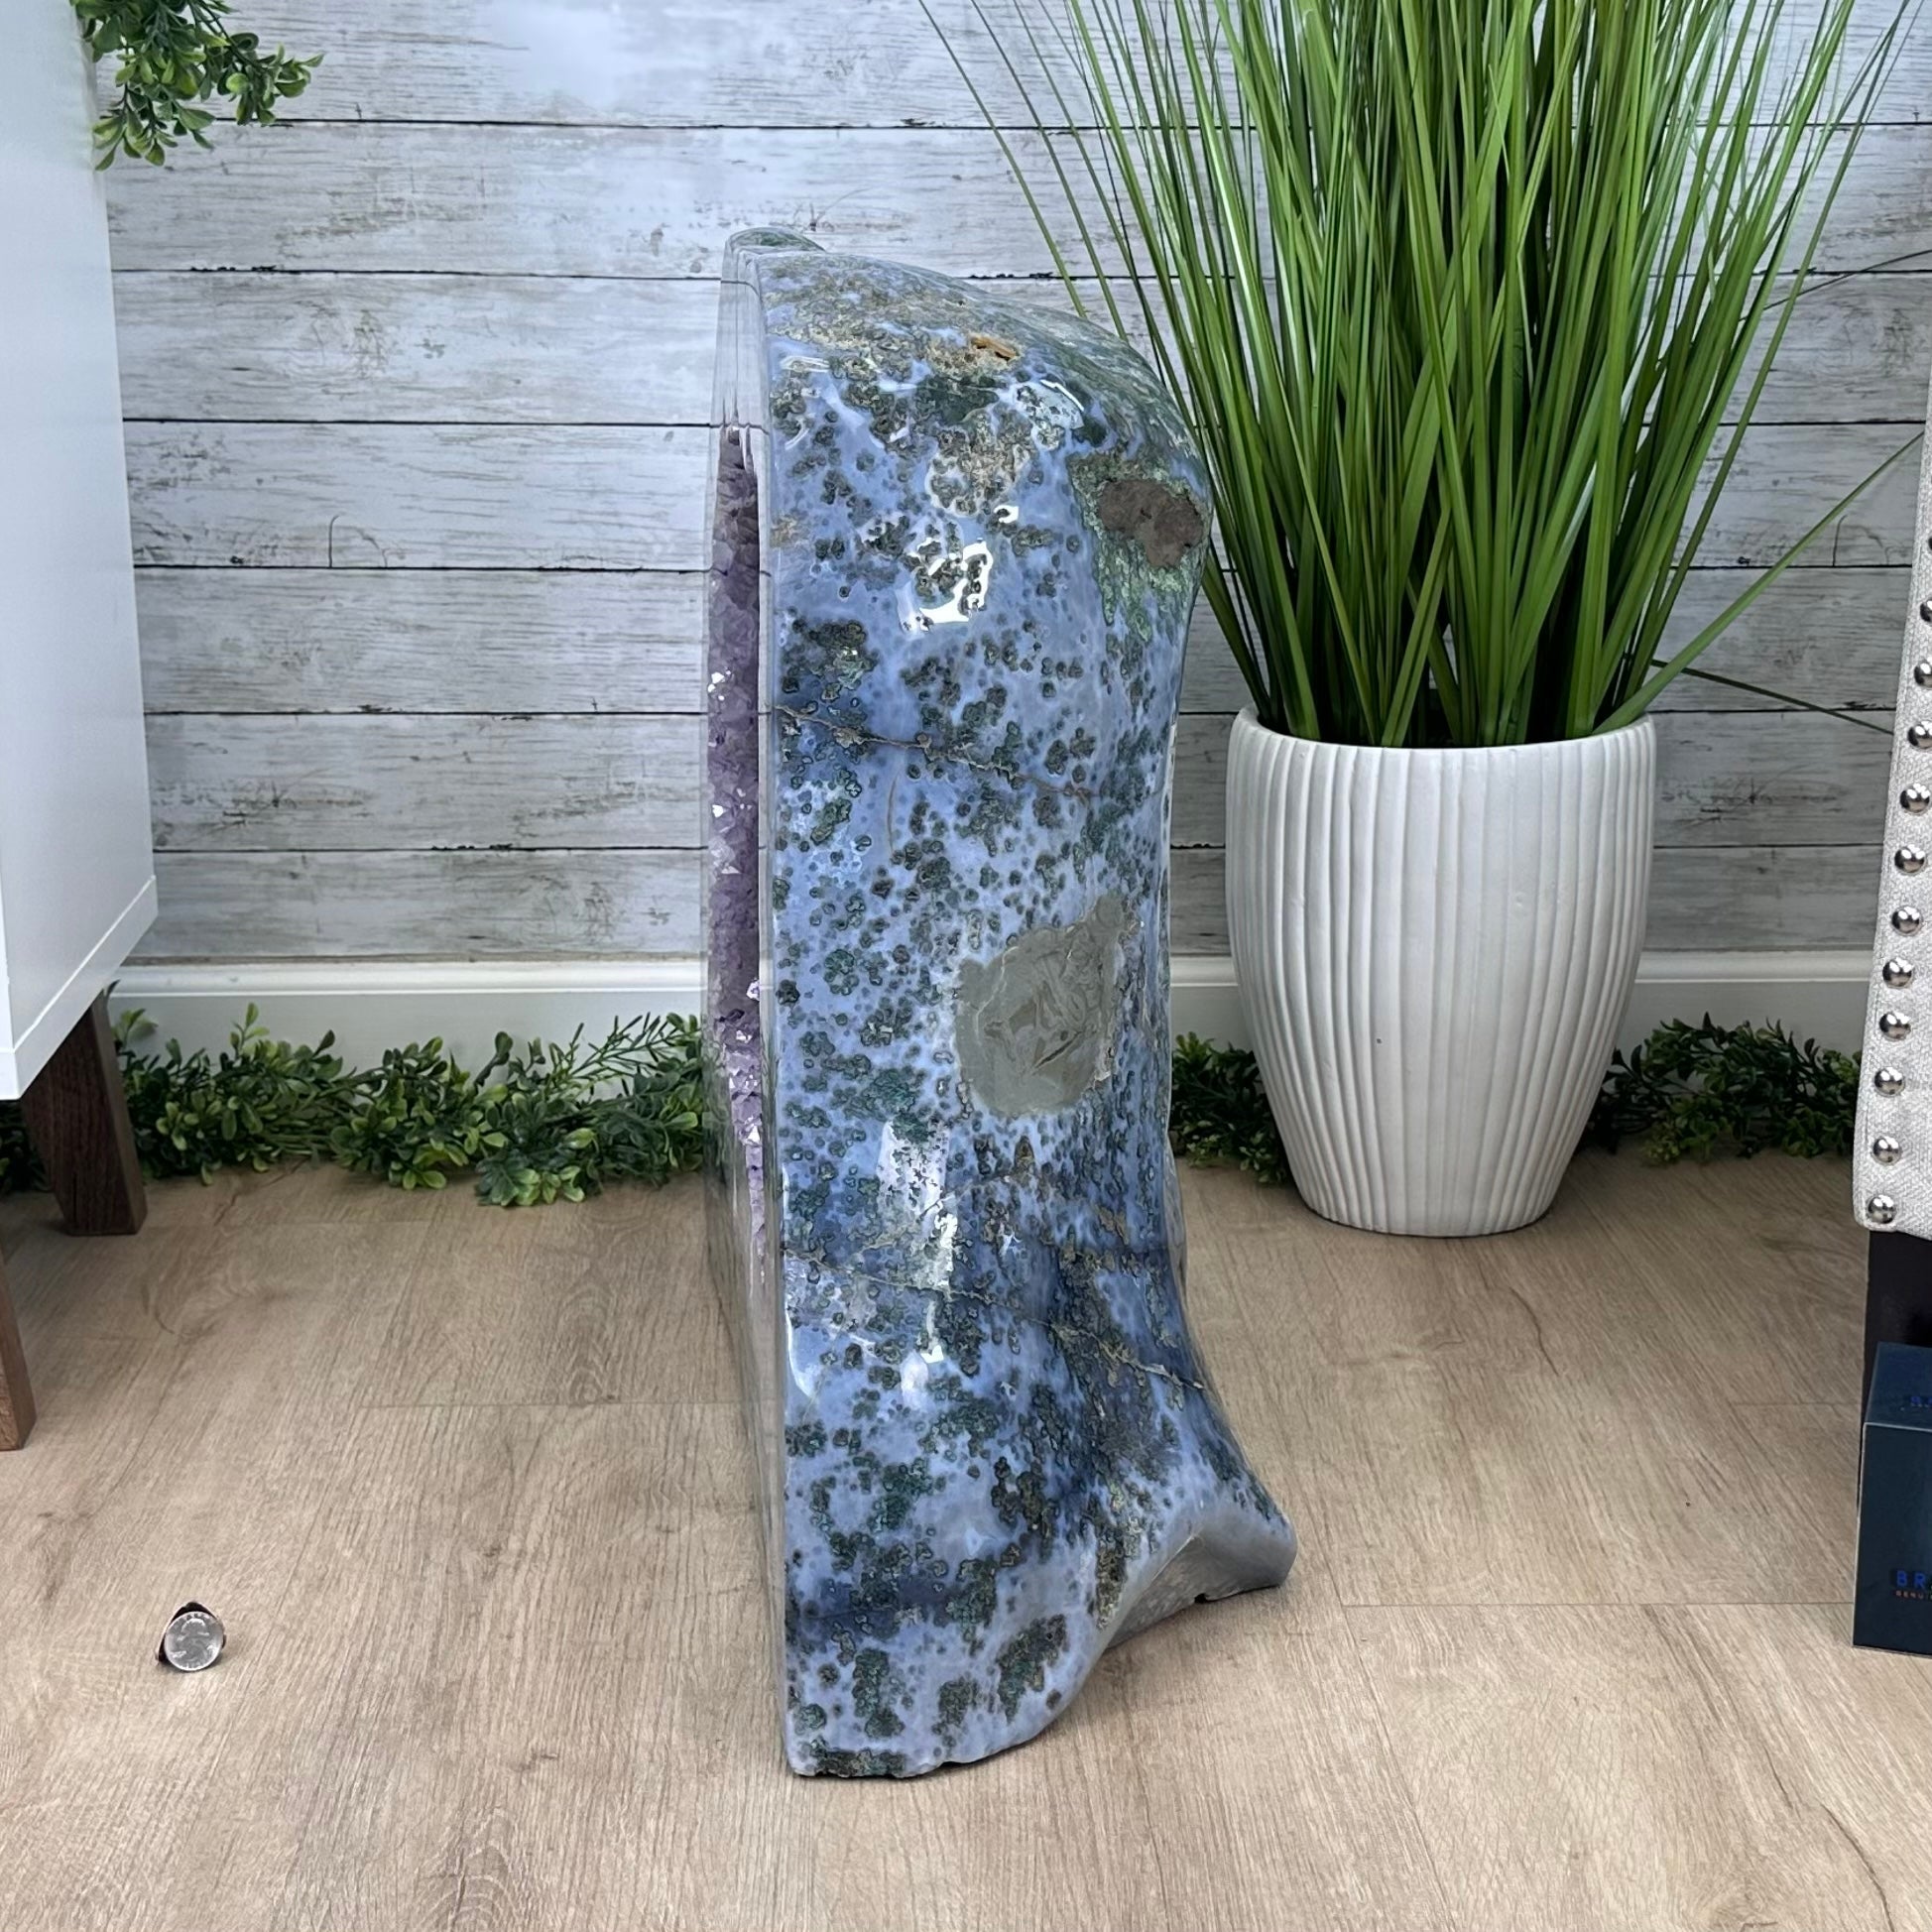 Large Extra Quality Polished Brazilian Amethyst Cathedral, 248.1 lbs & 23" tall Model #5602-0142 by Brazil Gems - Brazil GemsBrazil GemsLarge Extra Quality Polished Brazilian Amethyst Cathedral, 248.1 lbs & 23" tall Model #5602-0142 by Brazil GemsPolished Cathedrals5602-0142